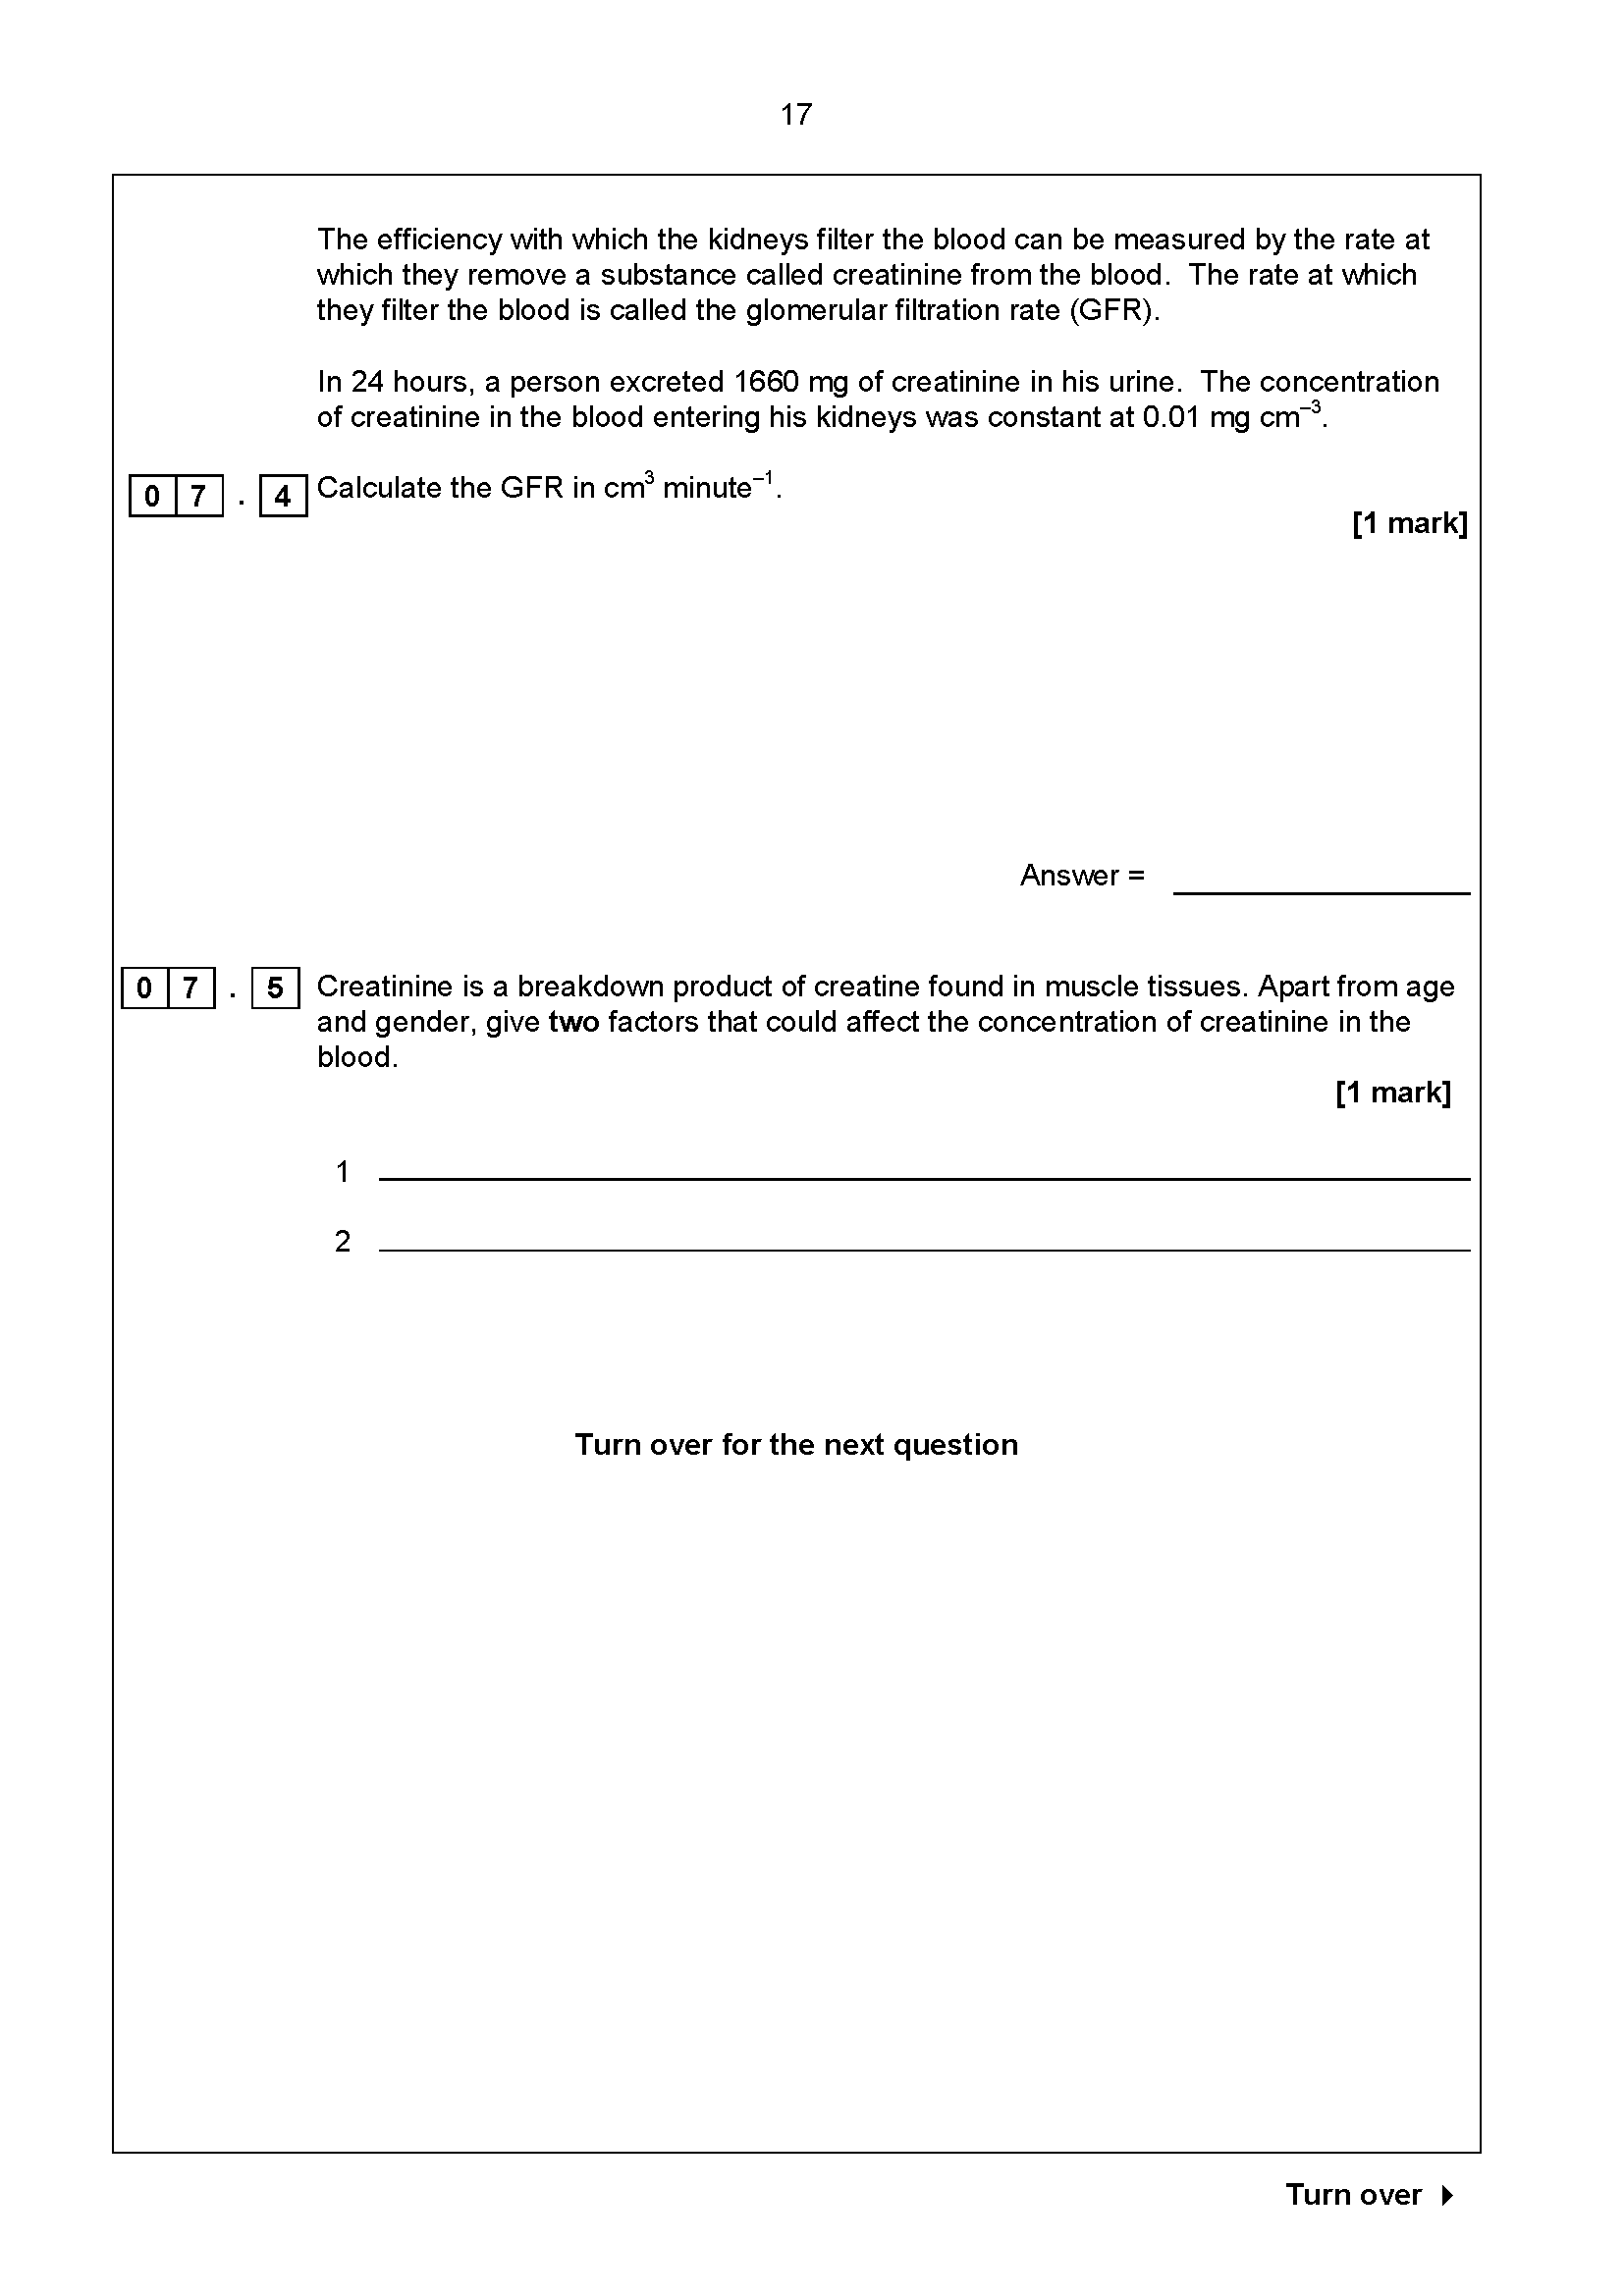 calculationquestionsAQA_Page_03.png